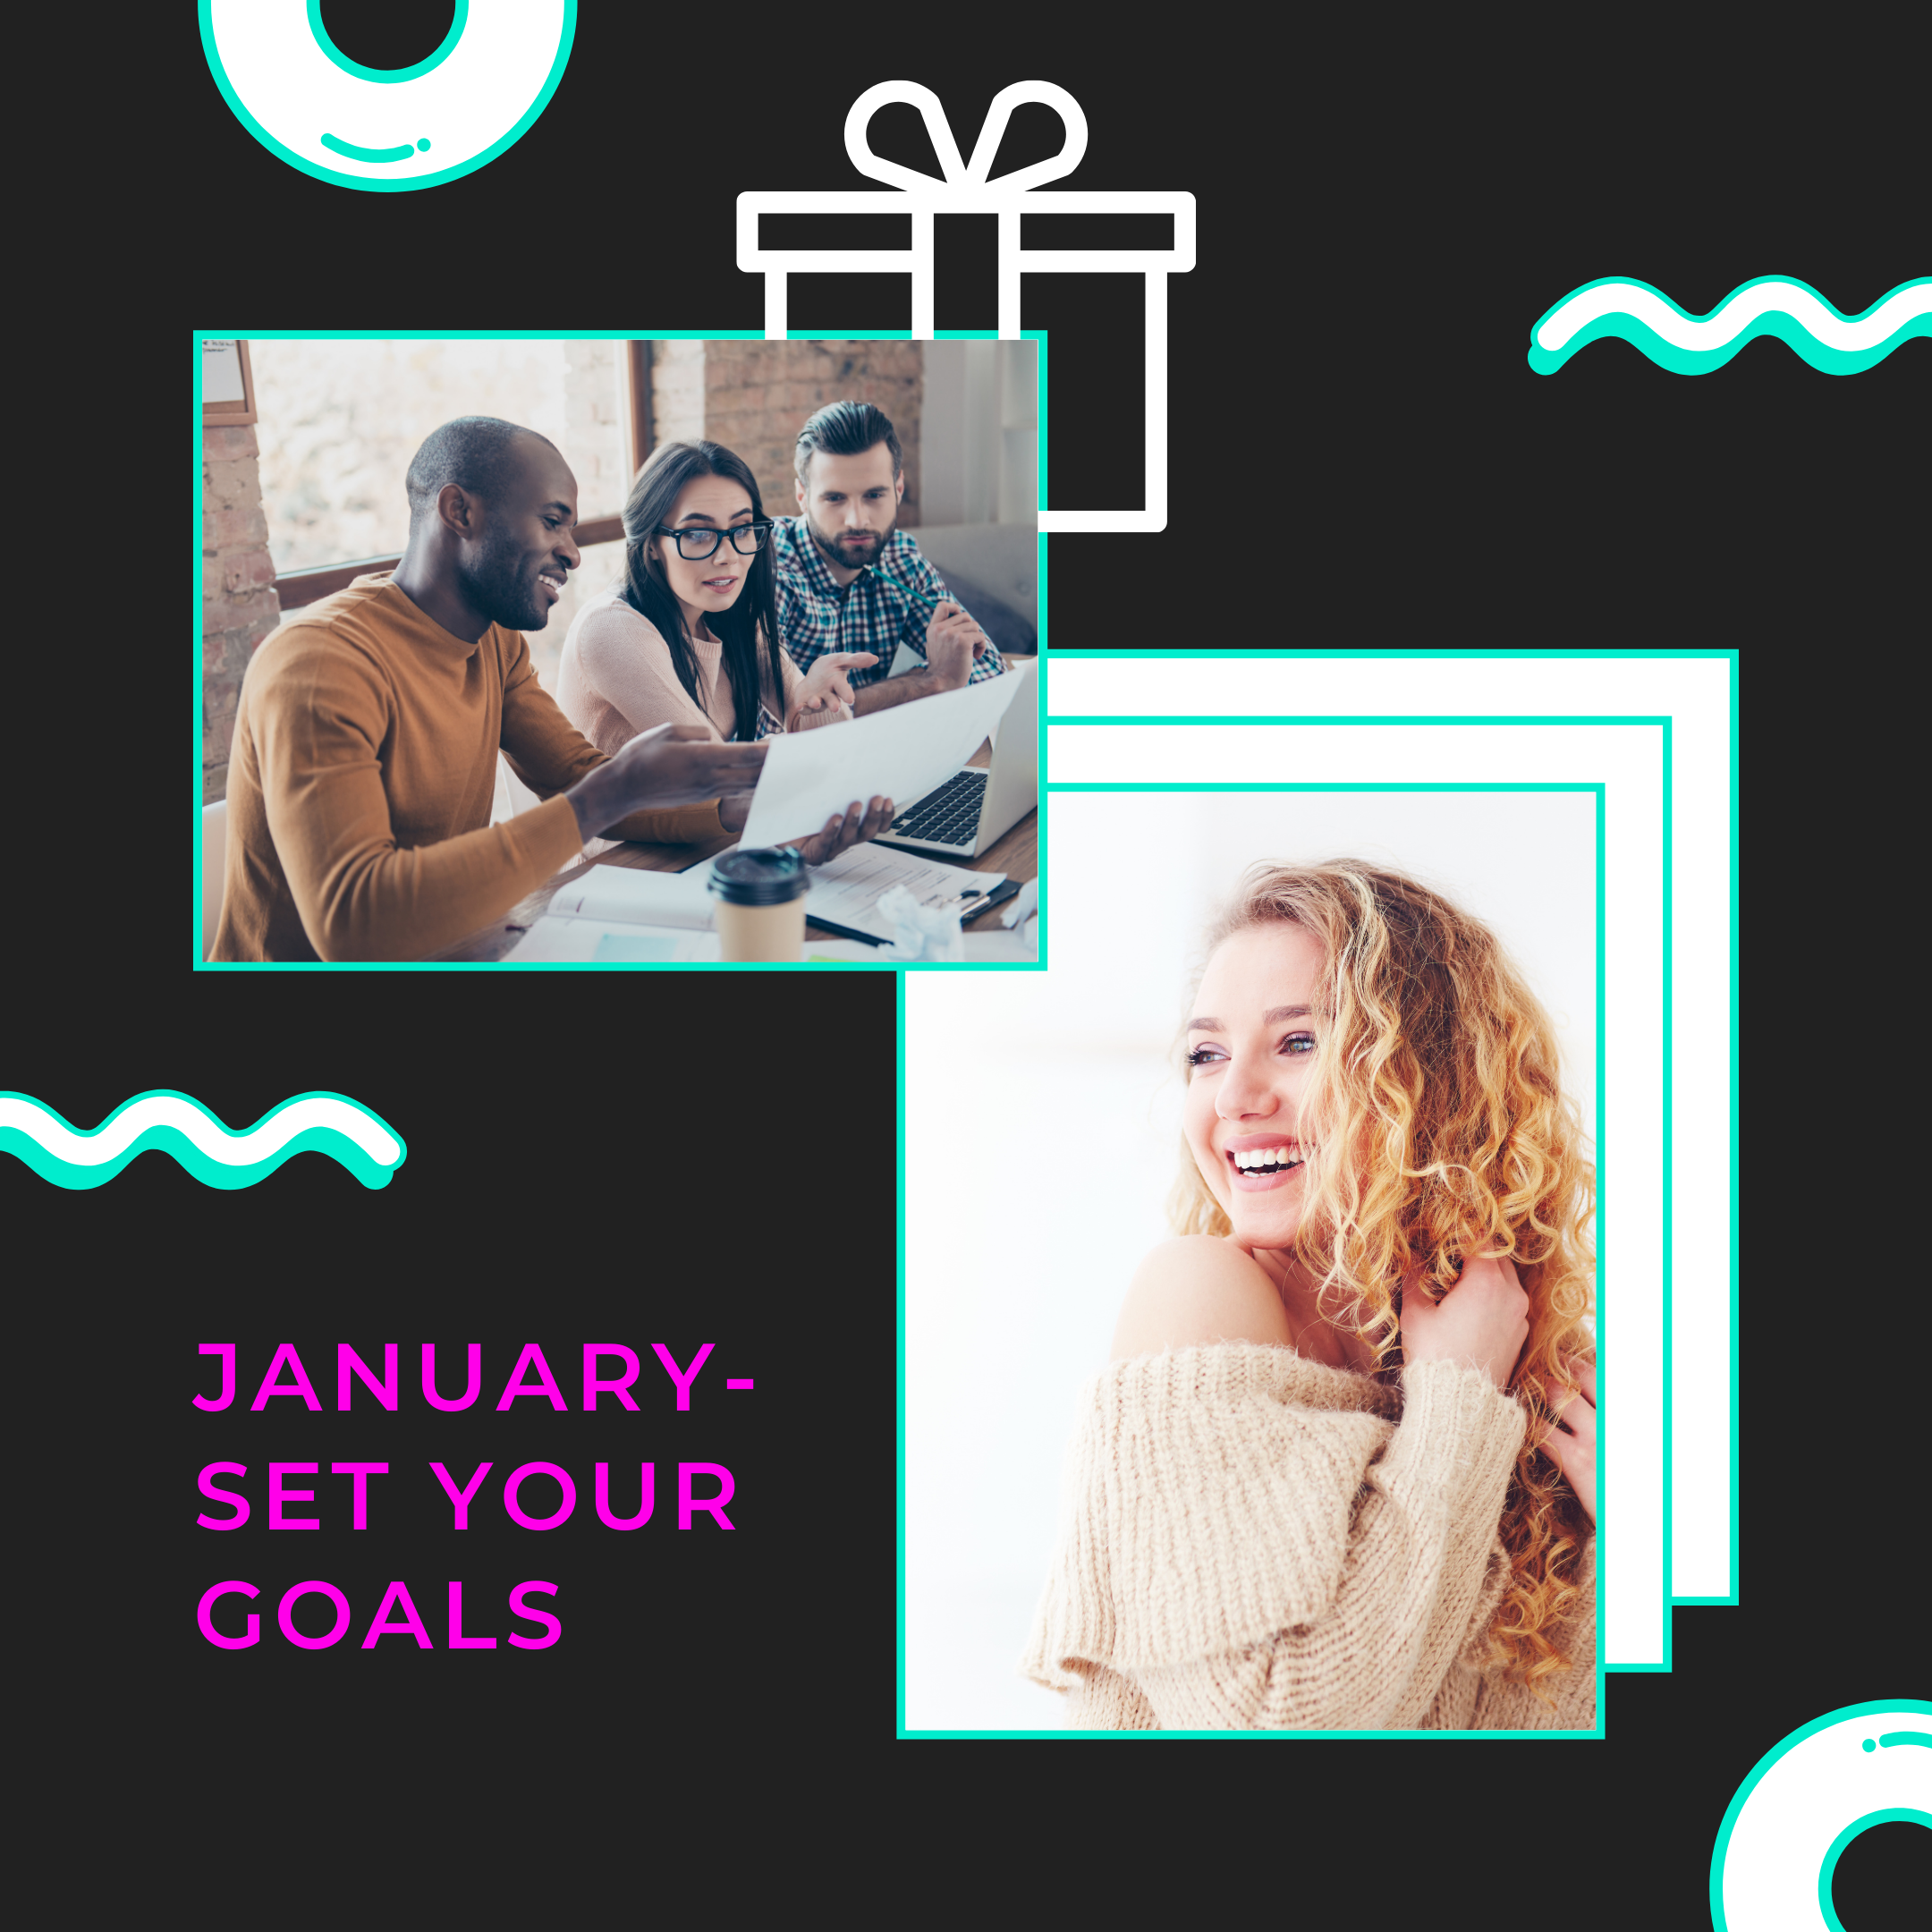 Set your goals in January